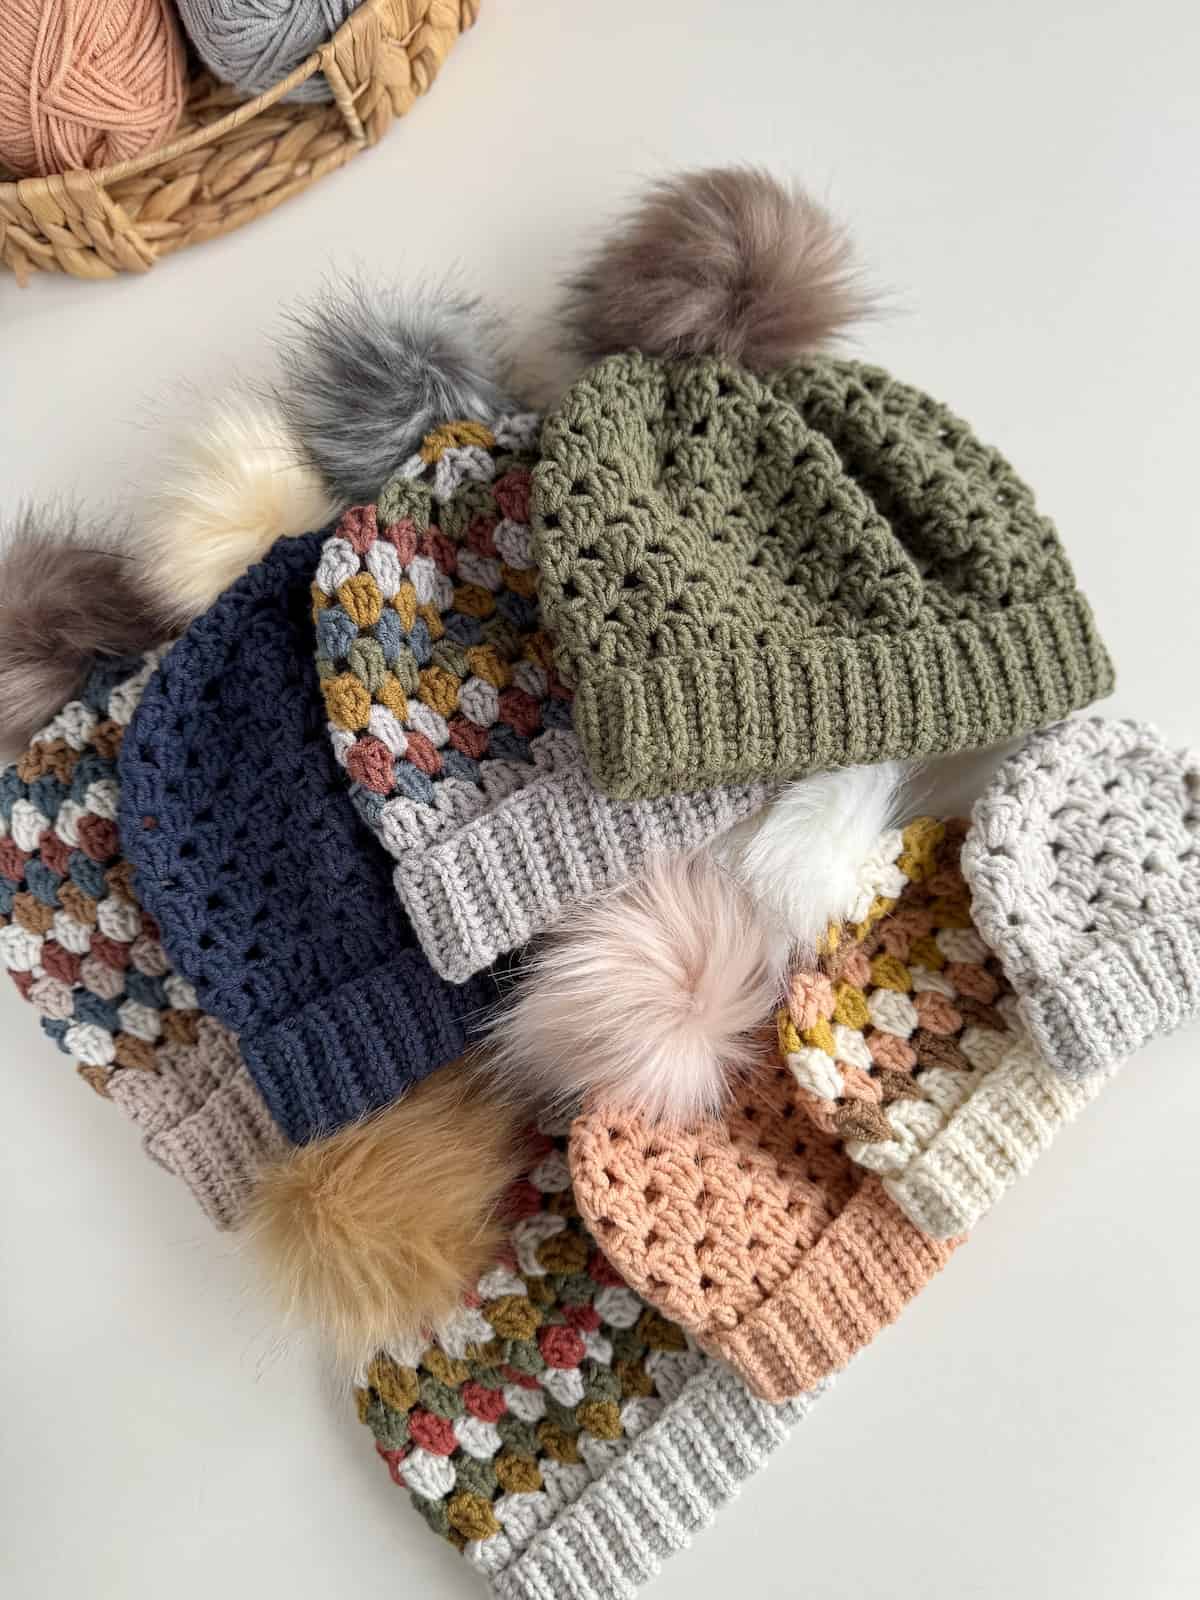 A group of crocheted hats with pom poms.